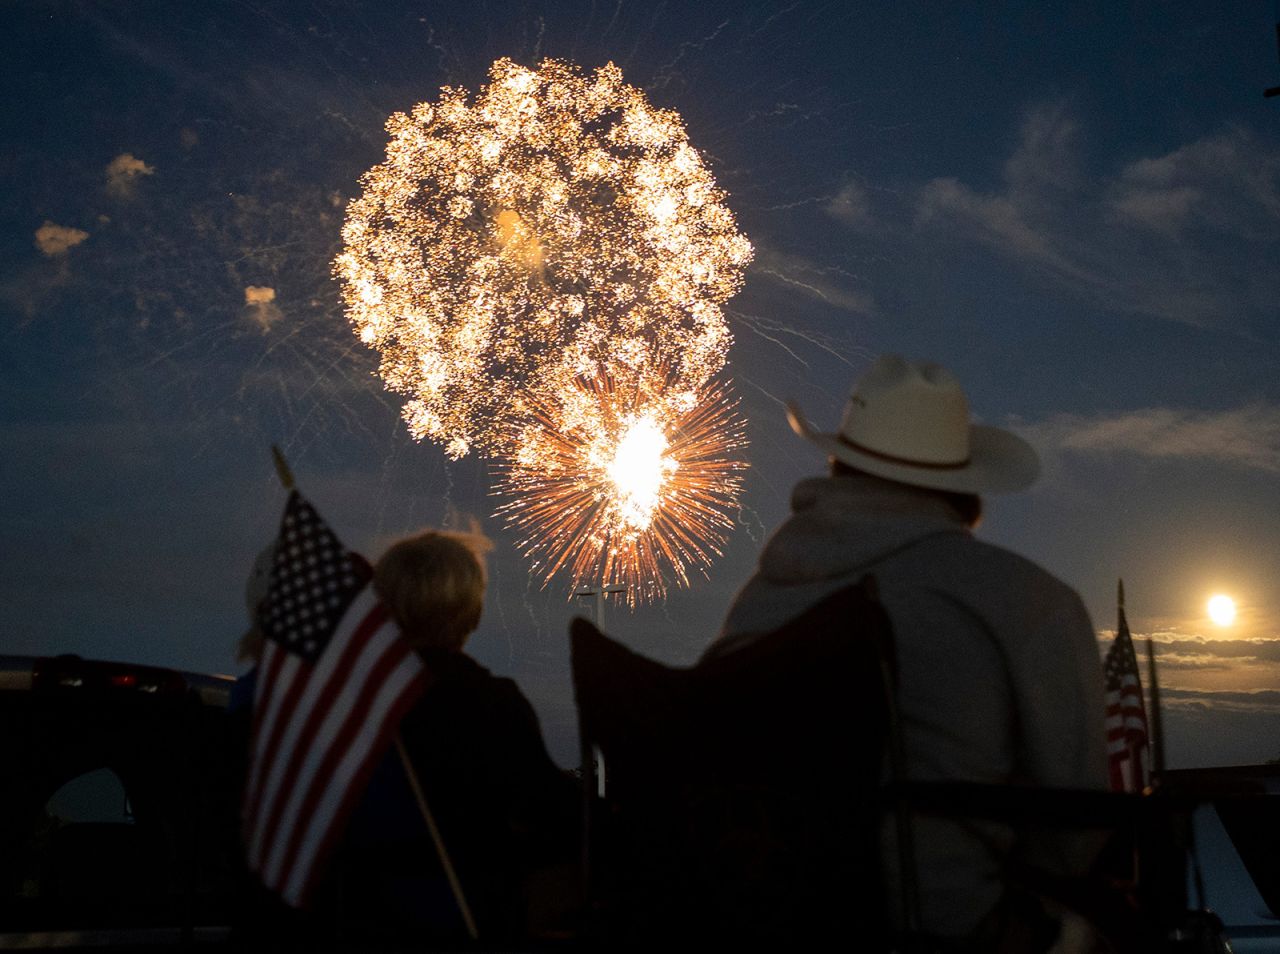 A family watches the fireworks display at The Ranch Event Complex in Loveland, Colorado.